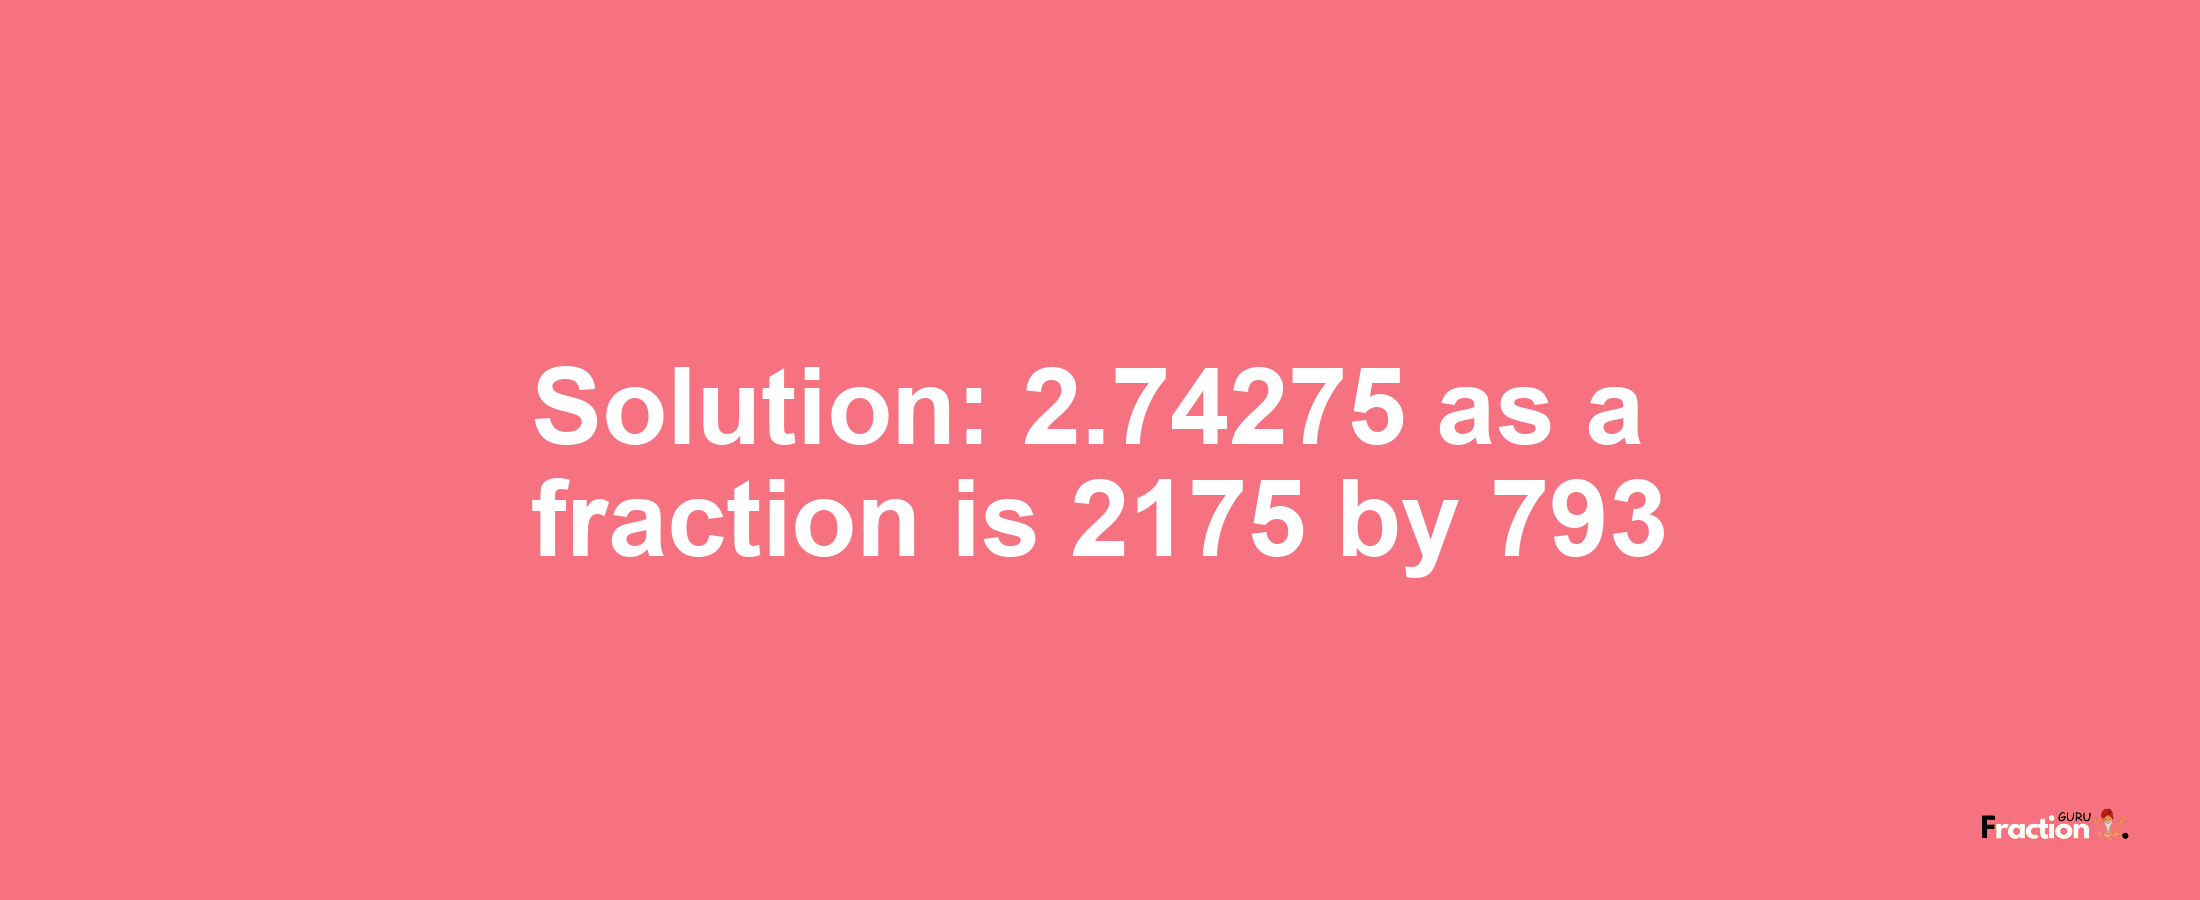 Solution:2.74275 as a fraction is 2175/793